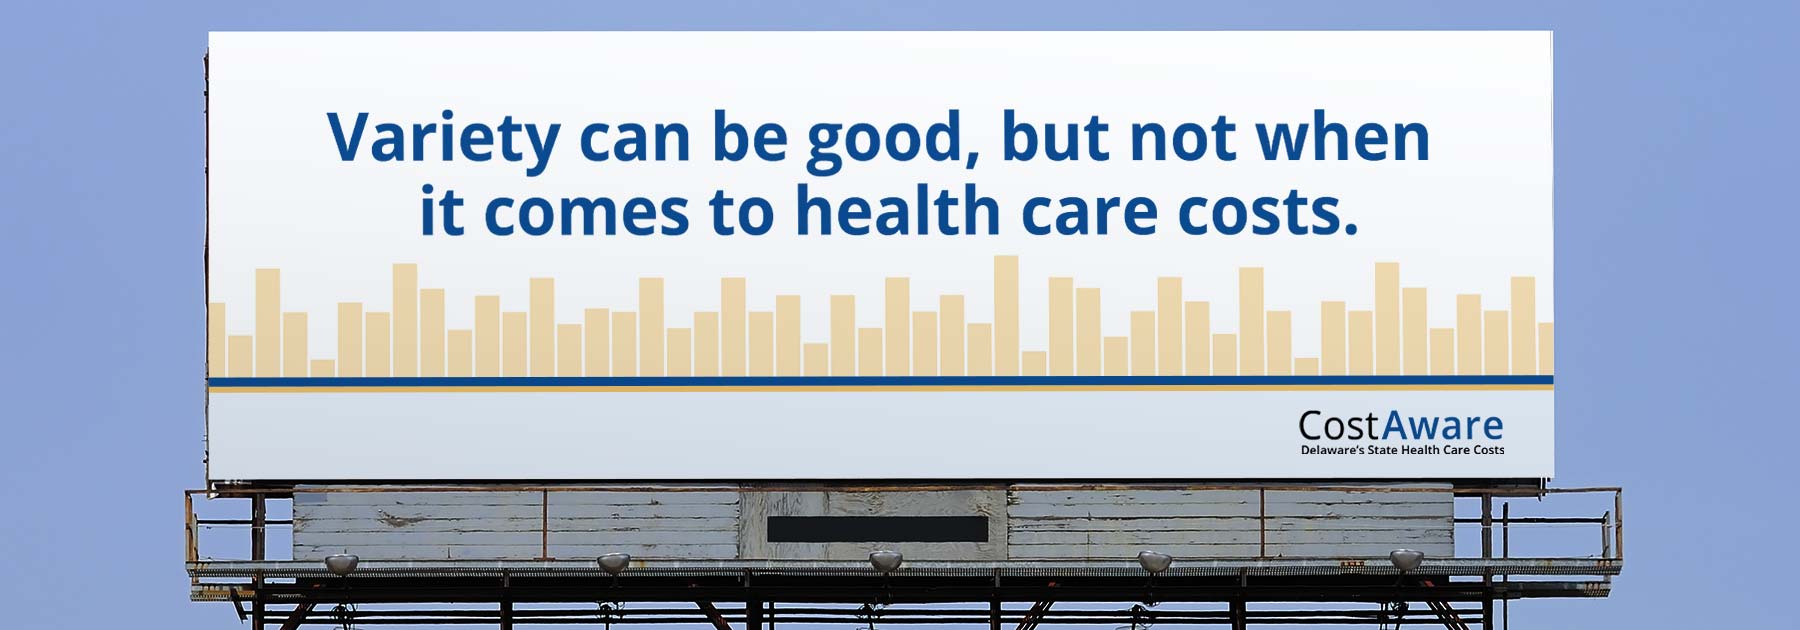 Billboard: Variety can be good, but not when it comes to health care costs.